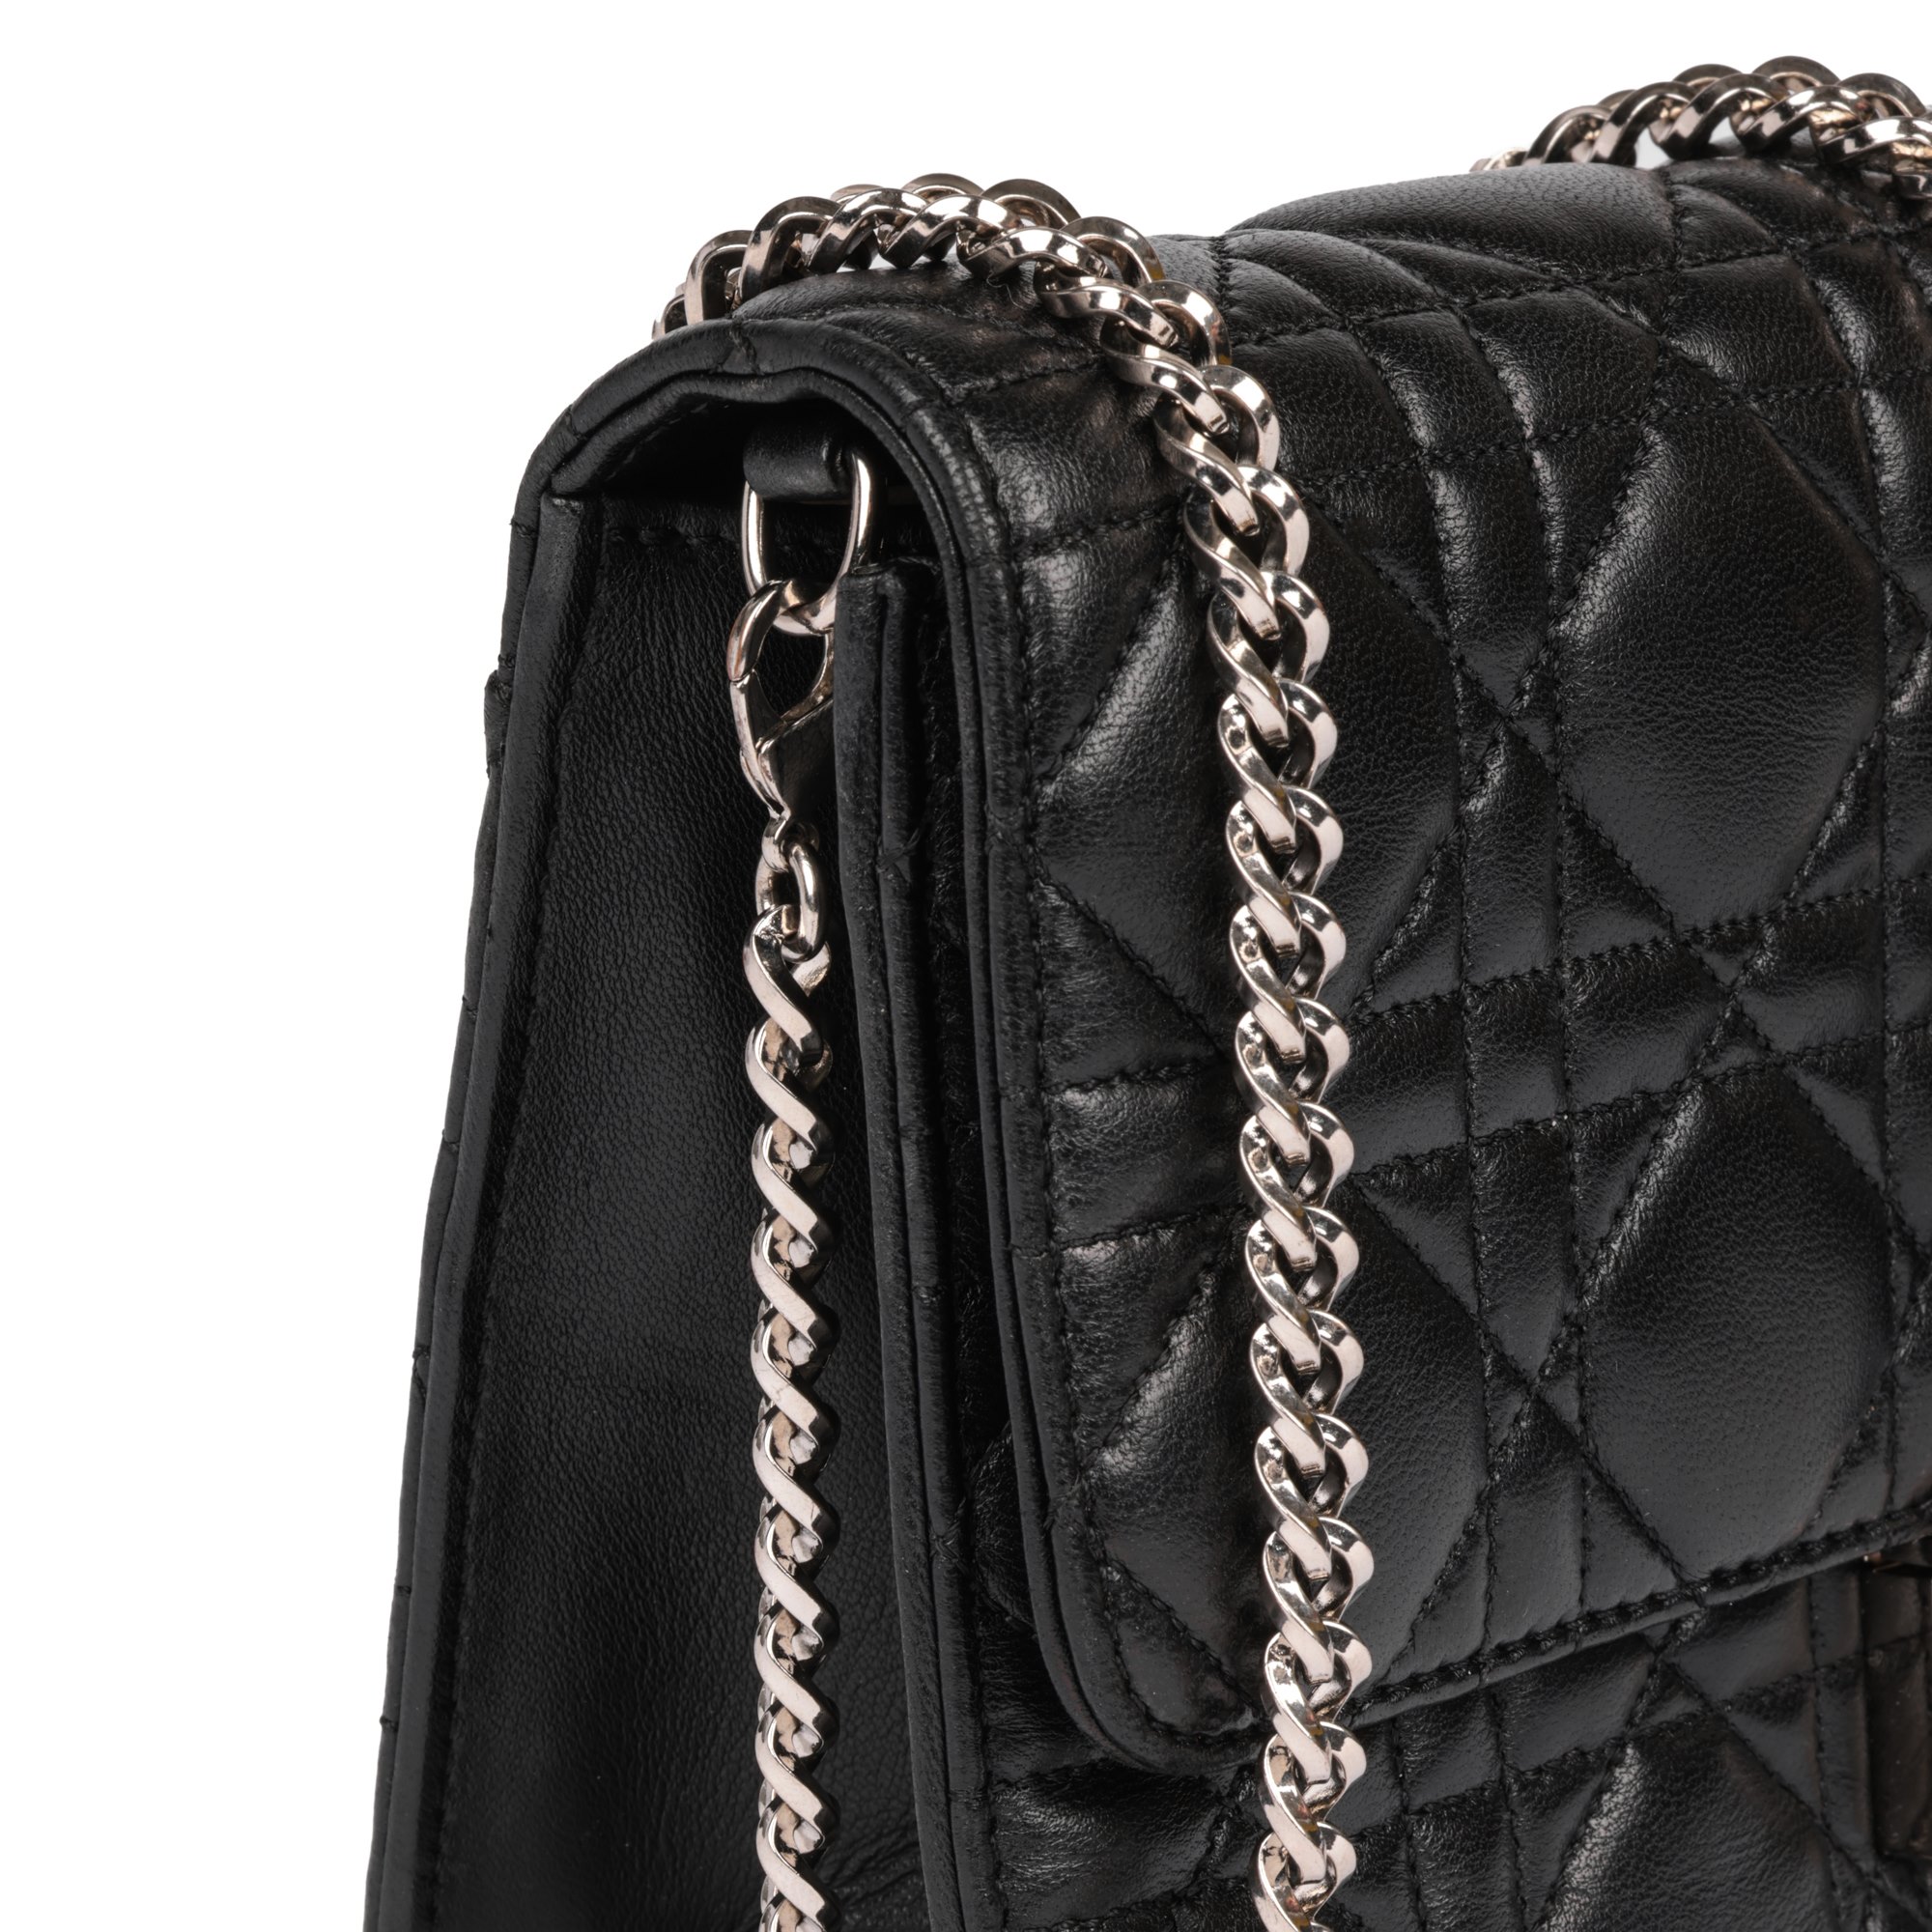 Christian Dior Black Quilted Lambskin Miss Dior Flap Bag